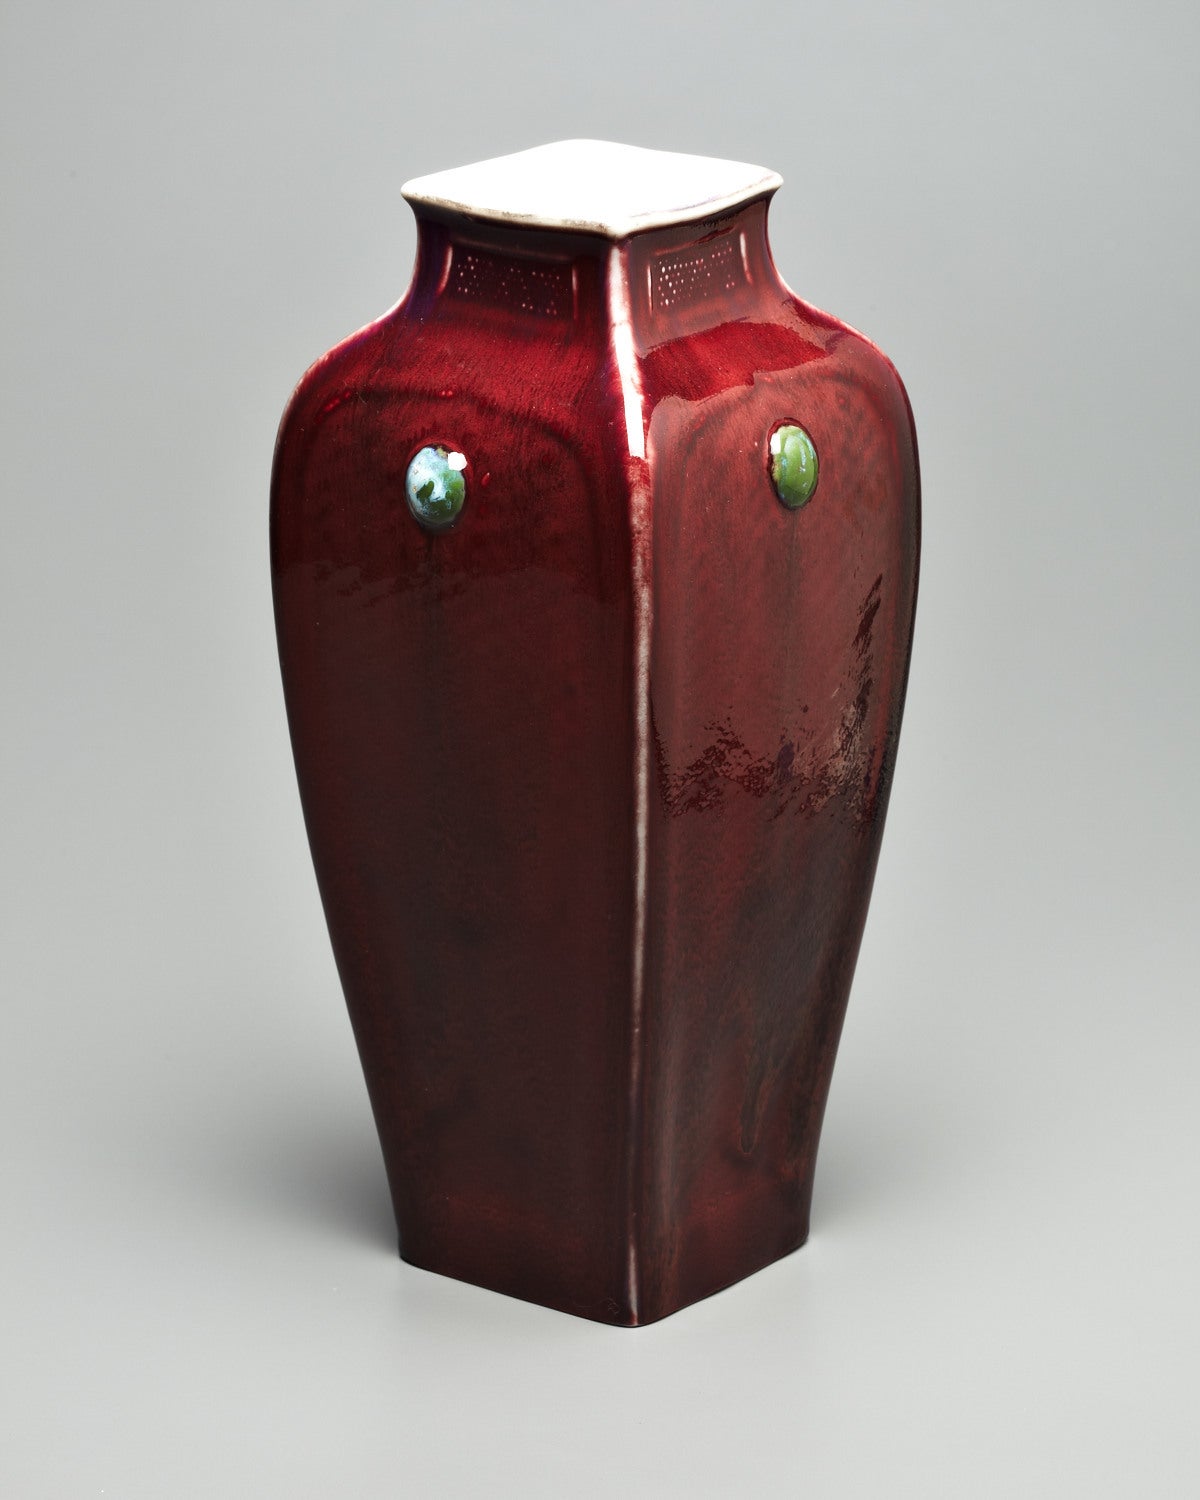 This stunning four-sided vase is covered in a rich sang-de-boeuf glaze, which thins at the edges, exposing the vivid white porcelain. Jade colored medallions with an alluring marbleized effect encircle the form at shoulder height. Marks: Painted T